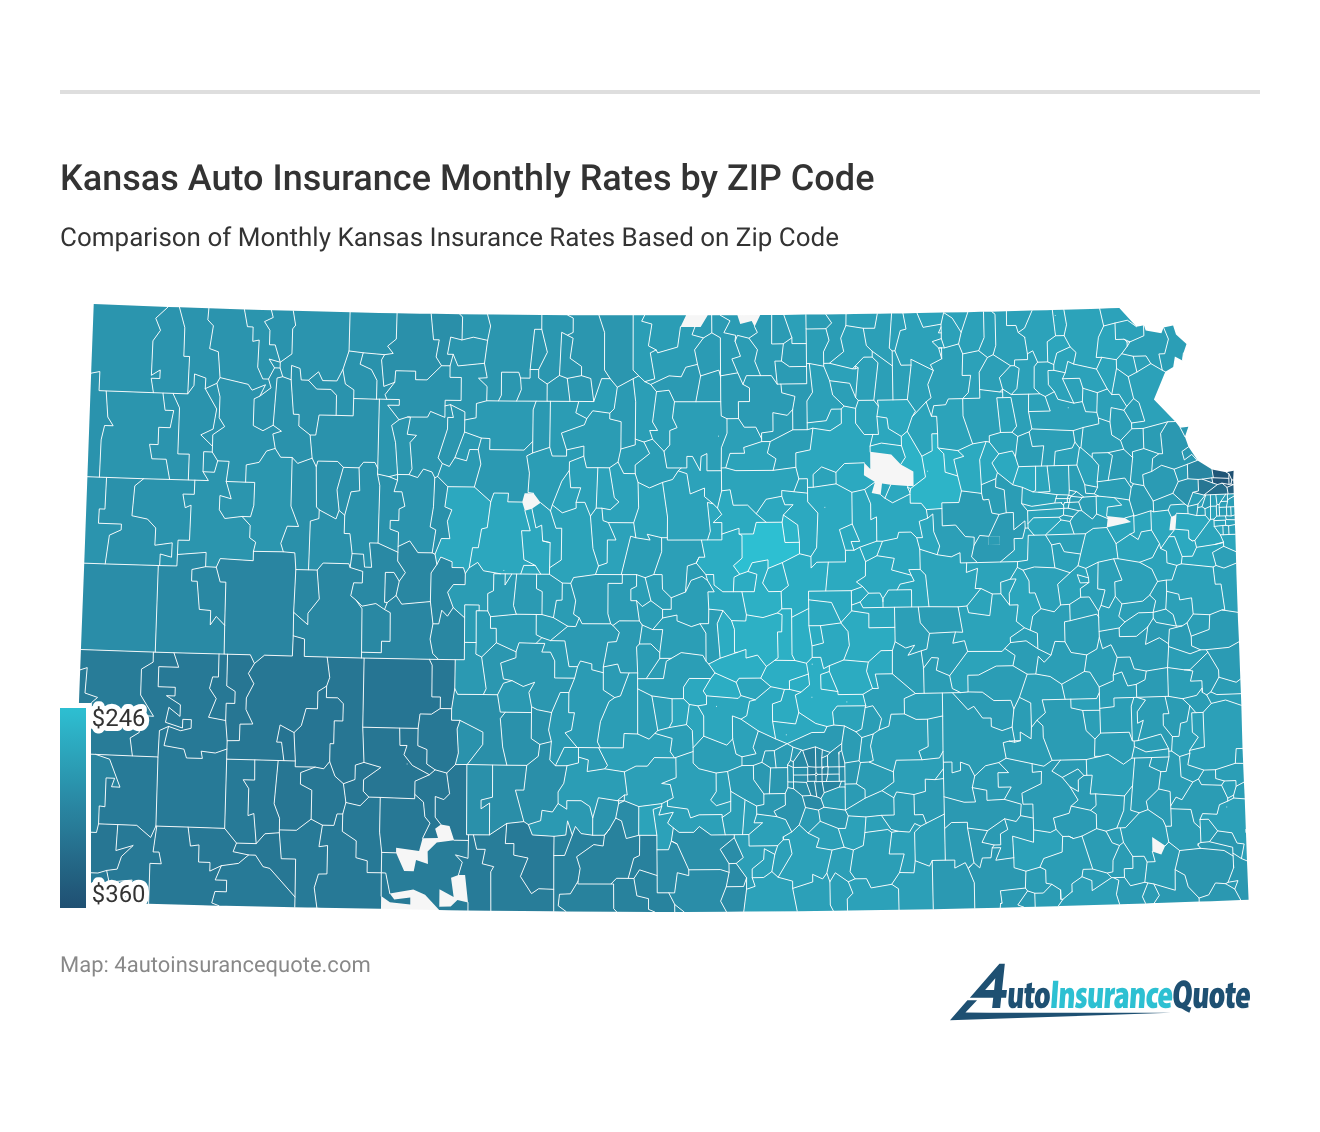 <h3>Kansas Auto Insurance Monthly Rates by ZIP Code</h3>